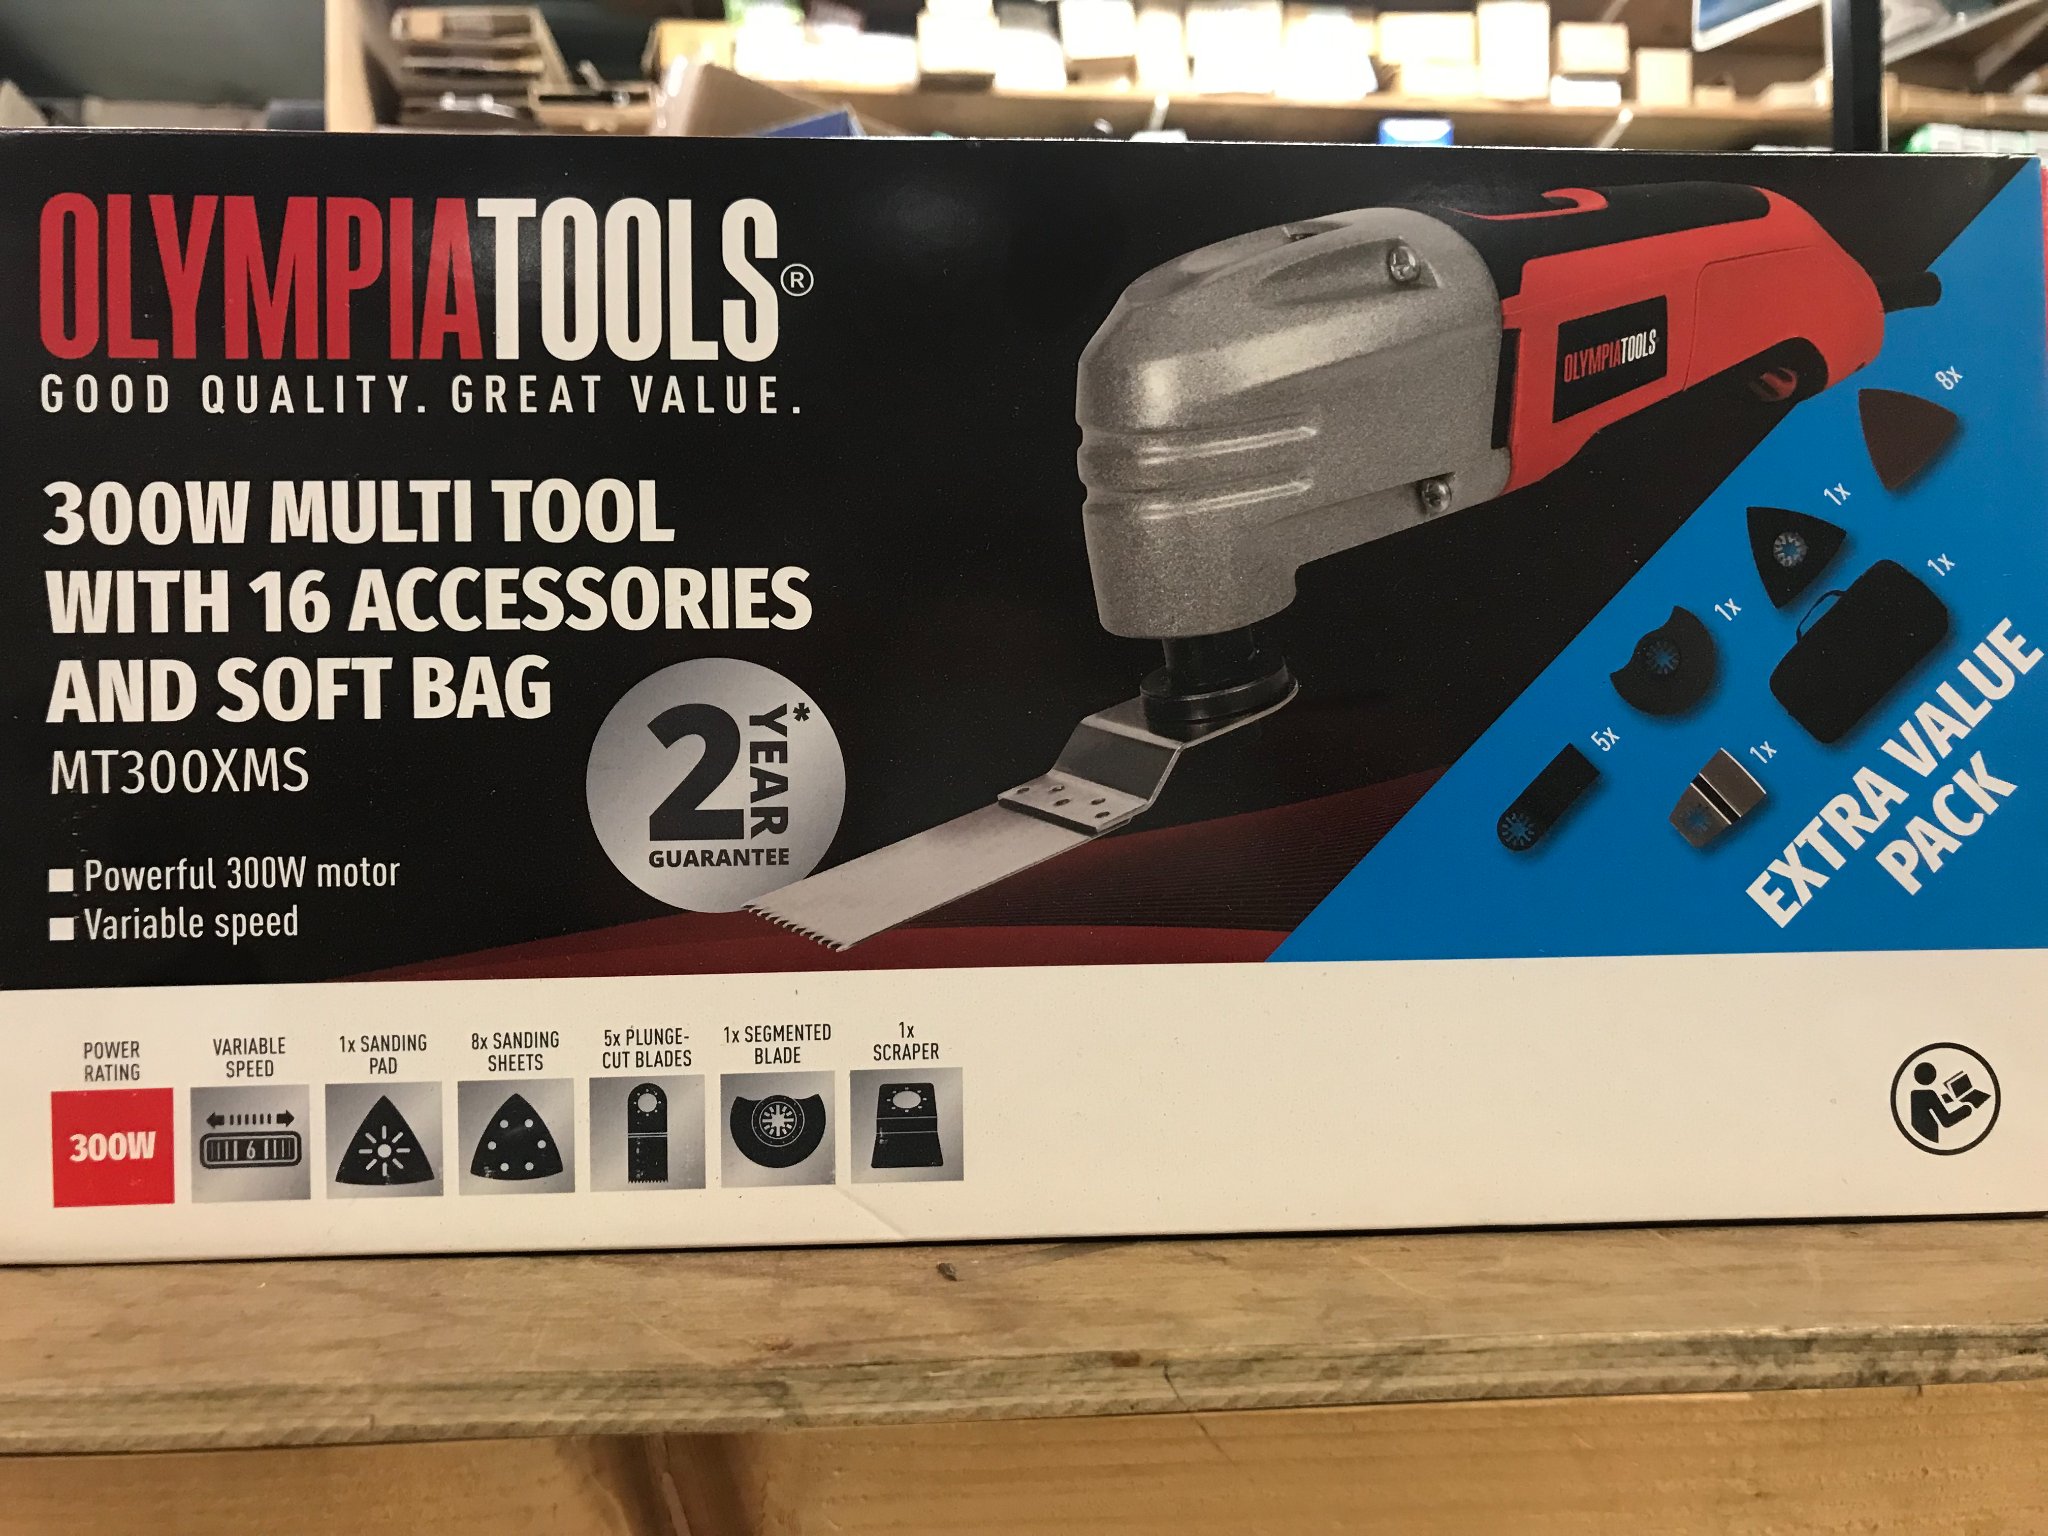 Olympia 300W Multi Tool with Accessories